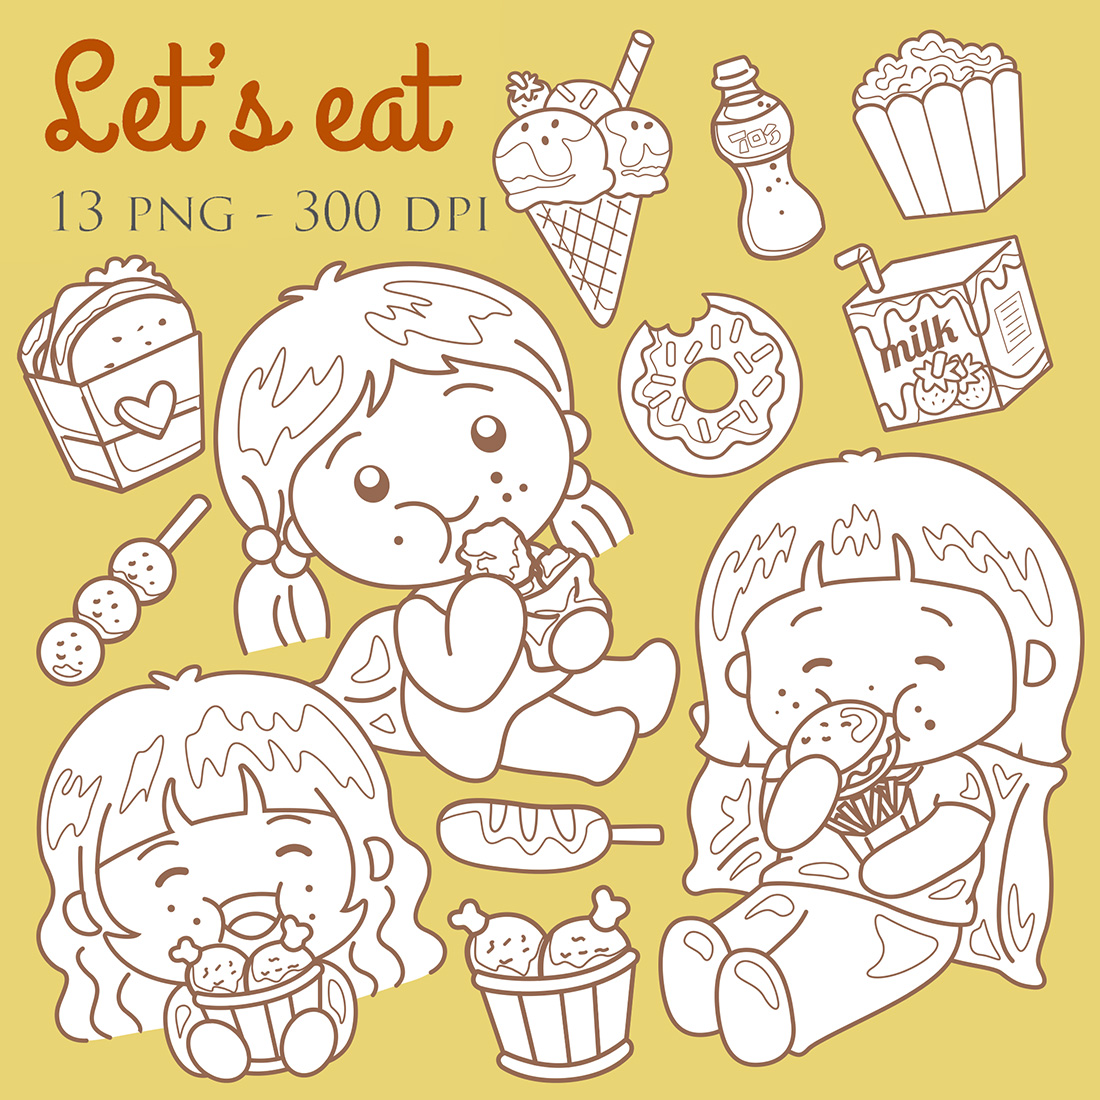 Cartoon Girl Kids Lets Love Like To Eat Food and Drink with Happy Popcorn Sandwich Chicken Ice Cream Donut Milk Digital Stamp Outline Black and White cover image.